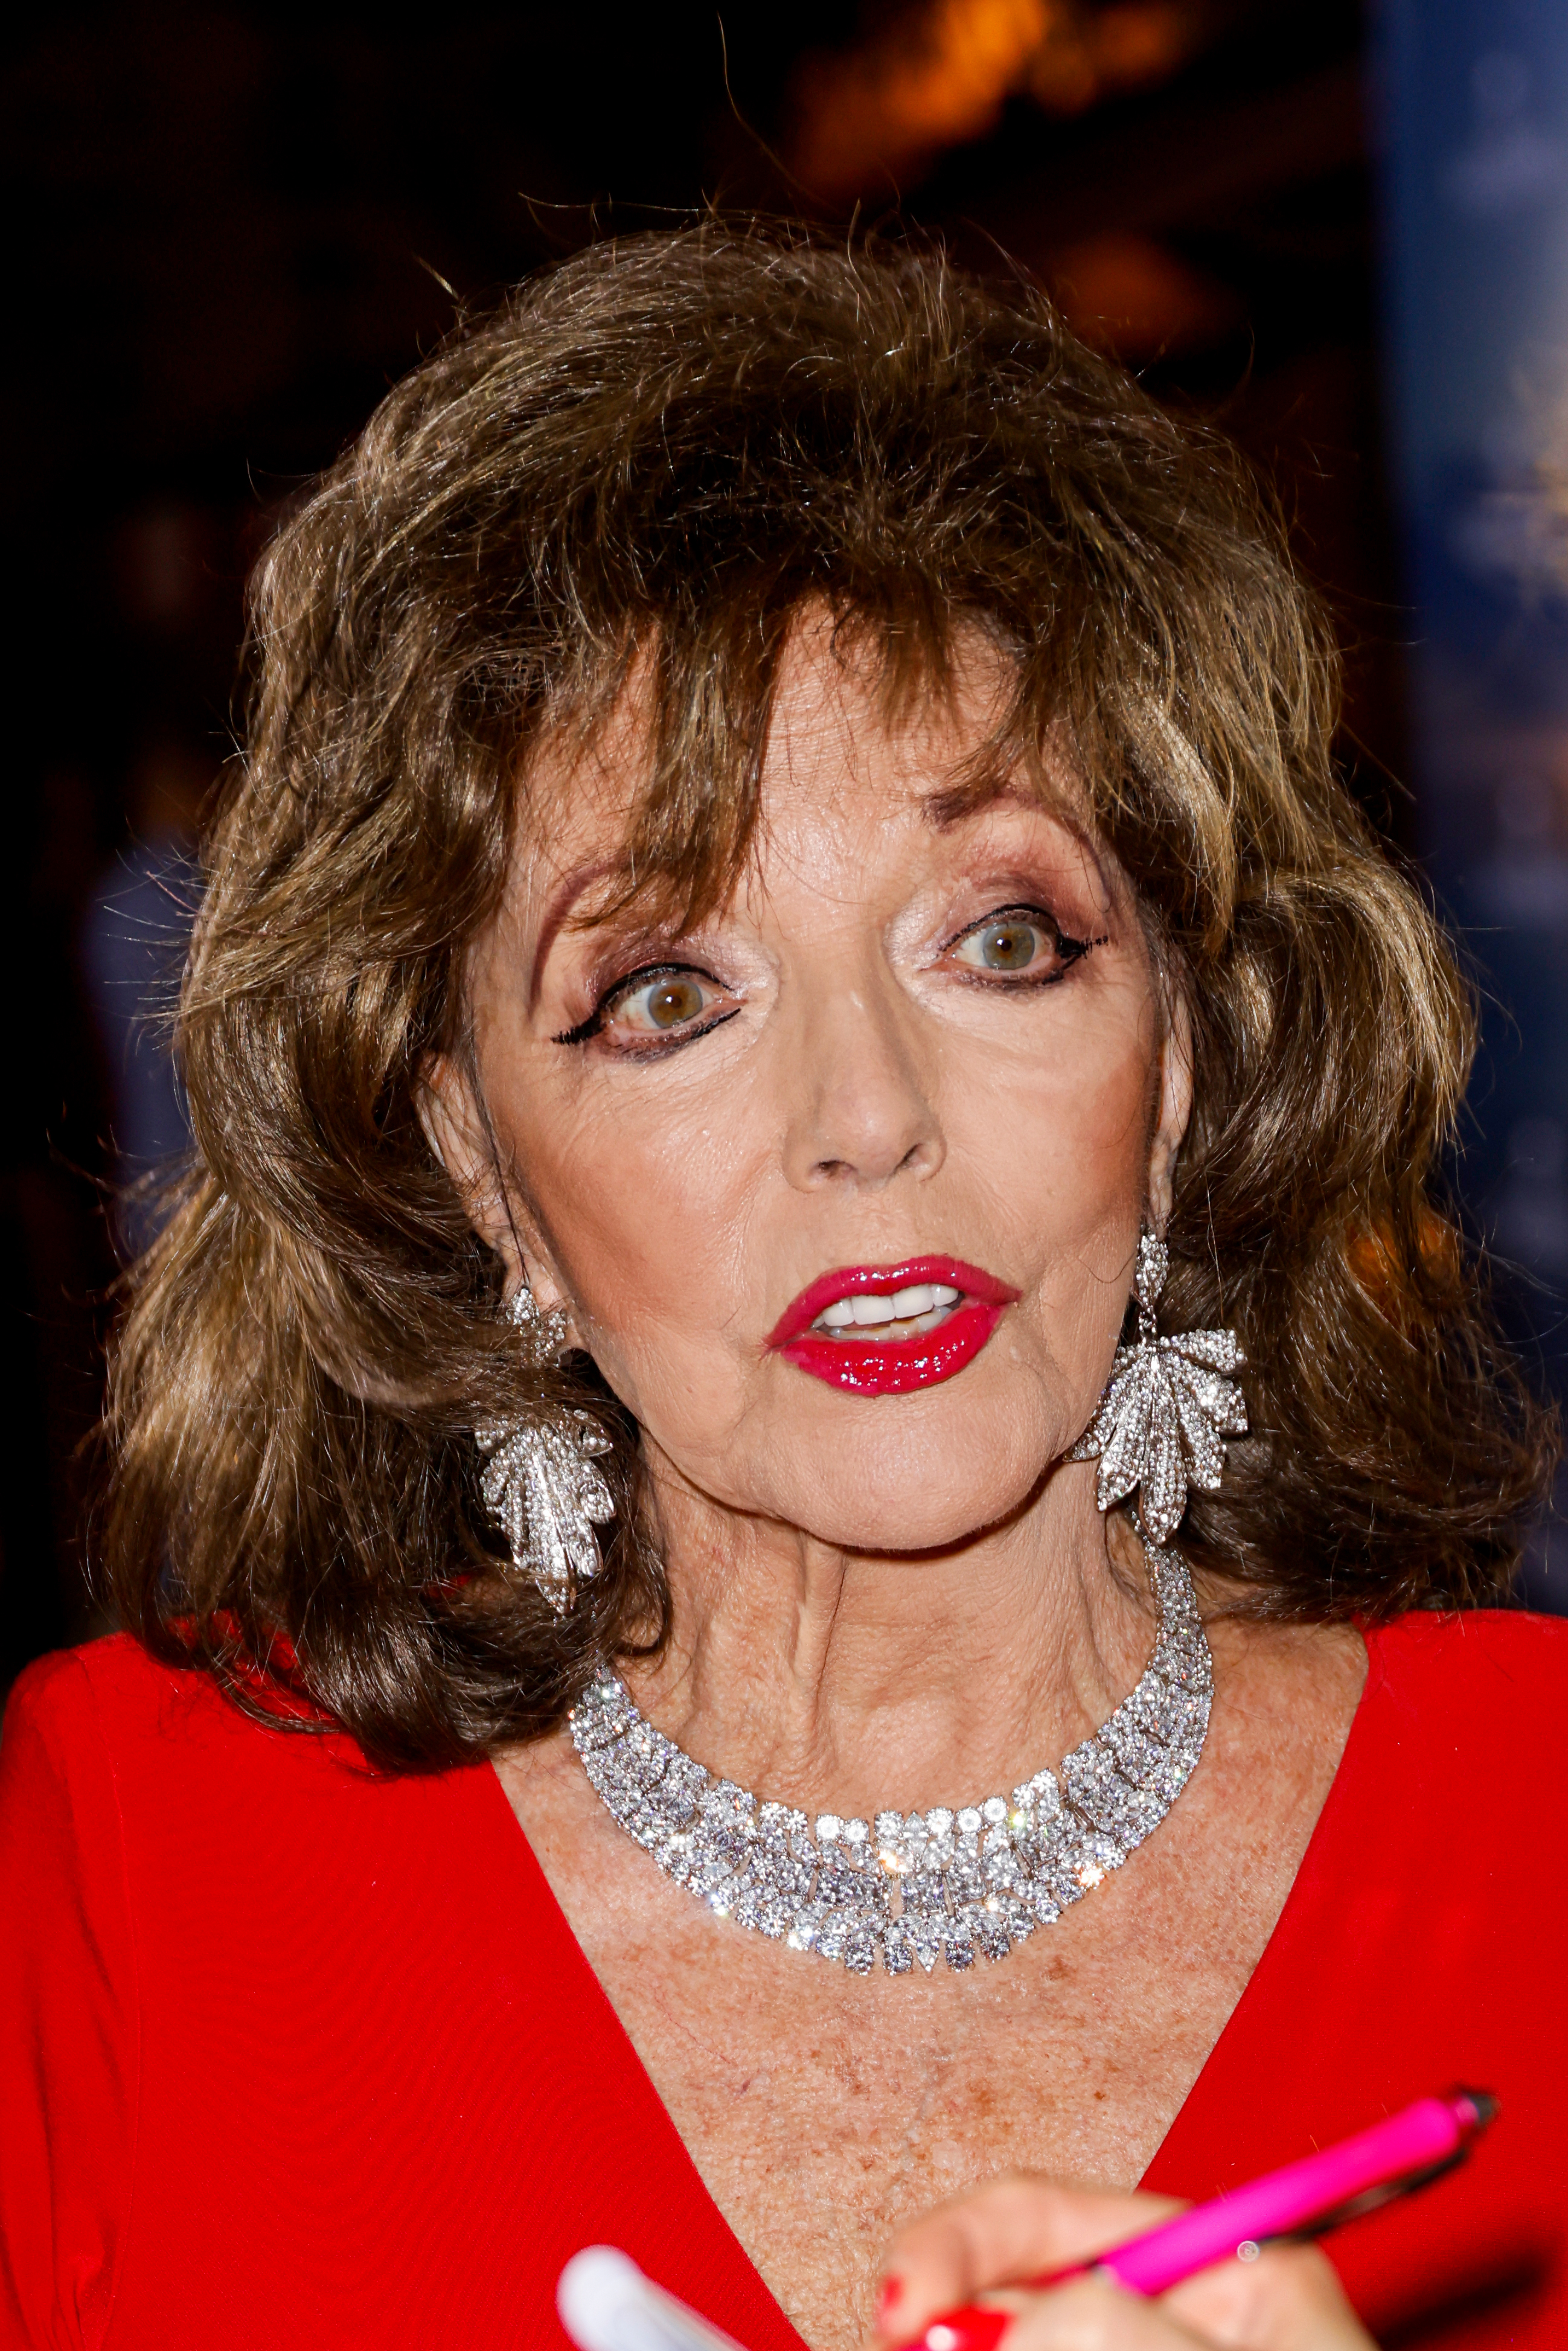 British actress Joan Collins during the Remus Charity Night on August 5, 2021 in Palma de Mallorca, Spain. | Source: Getty Images